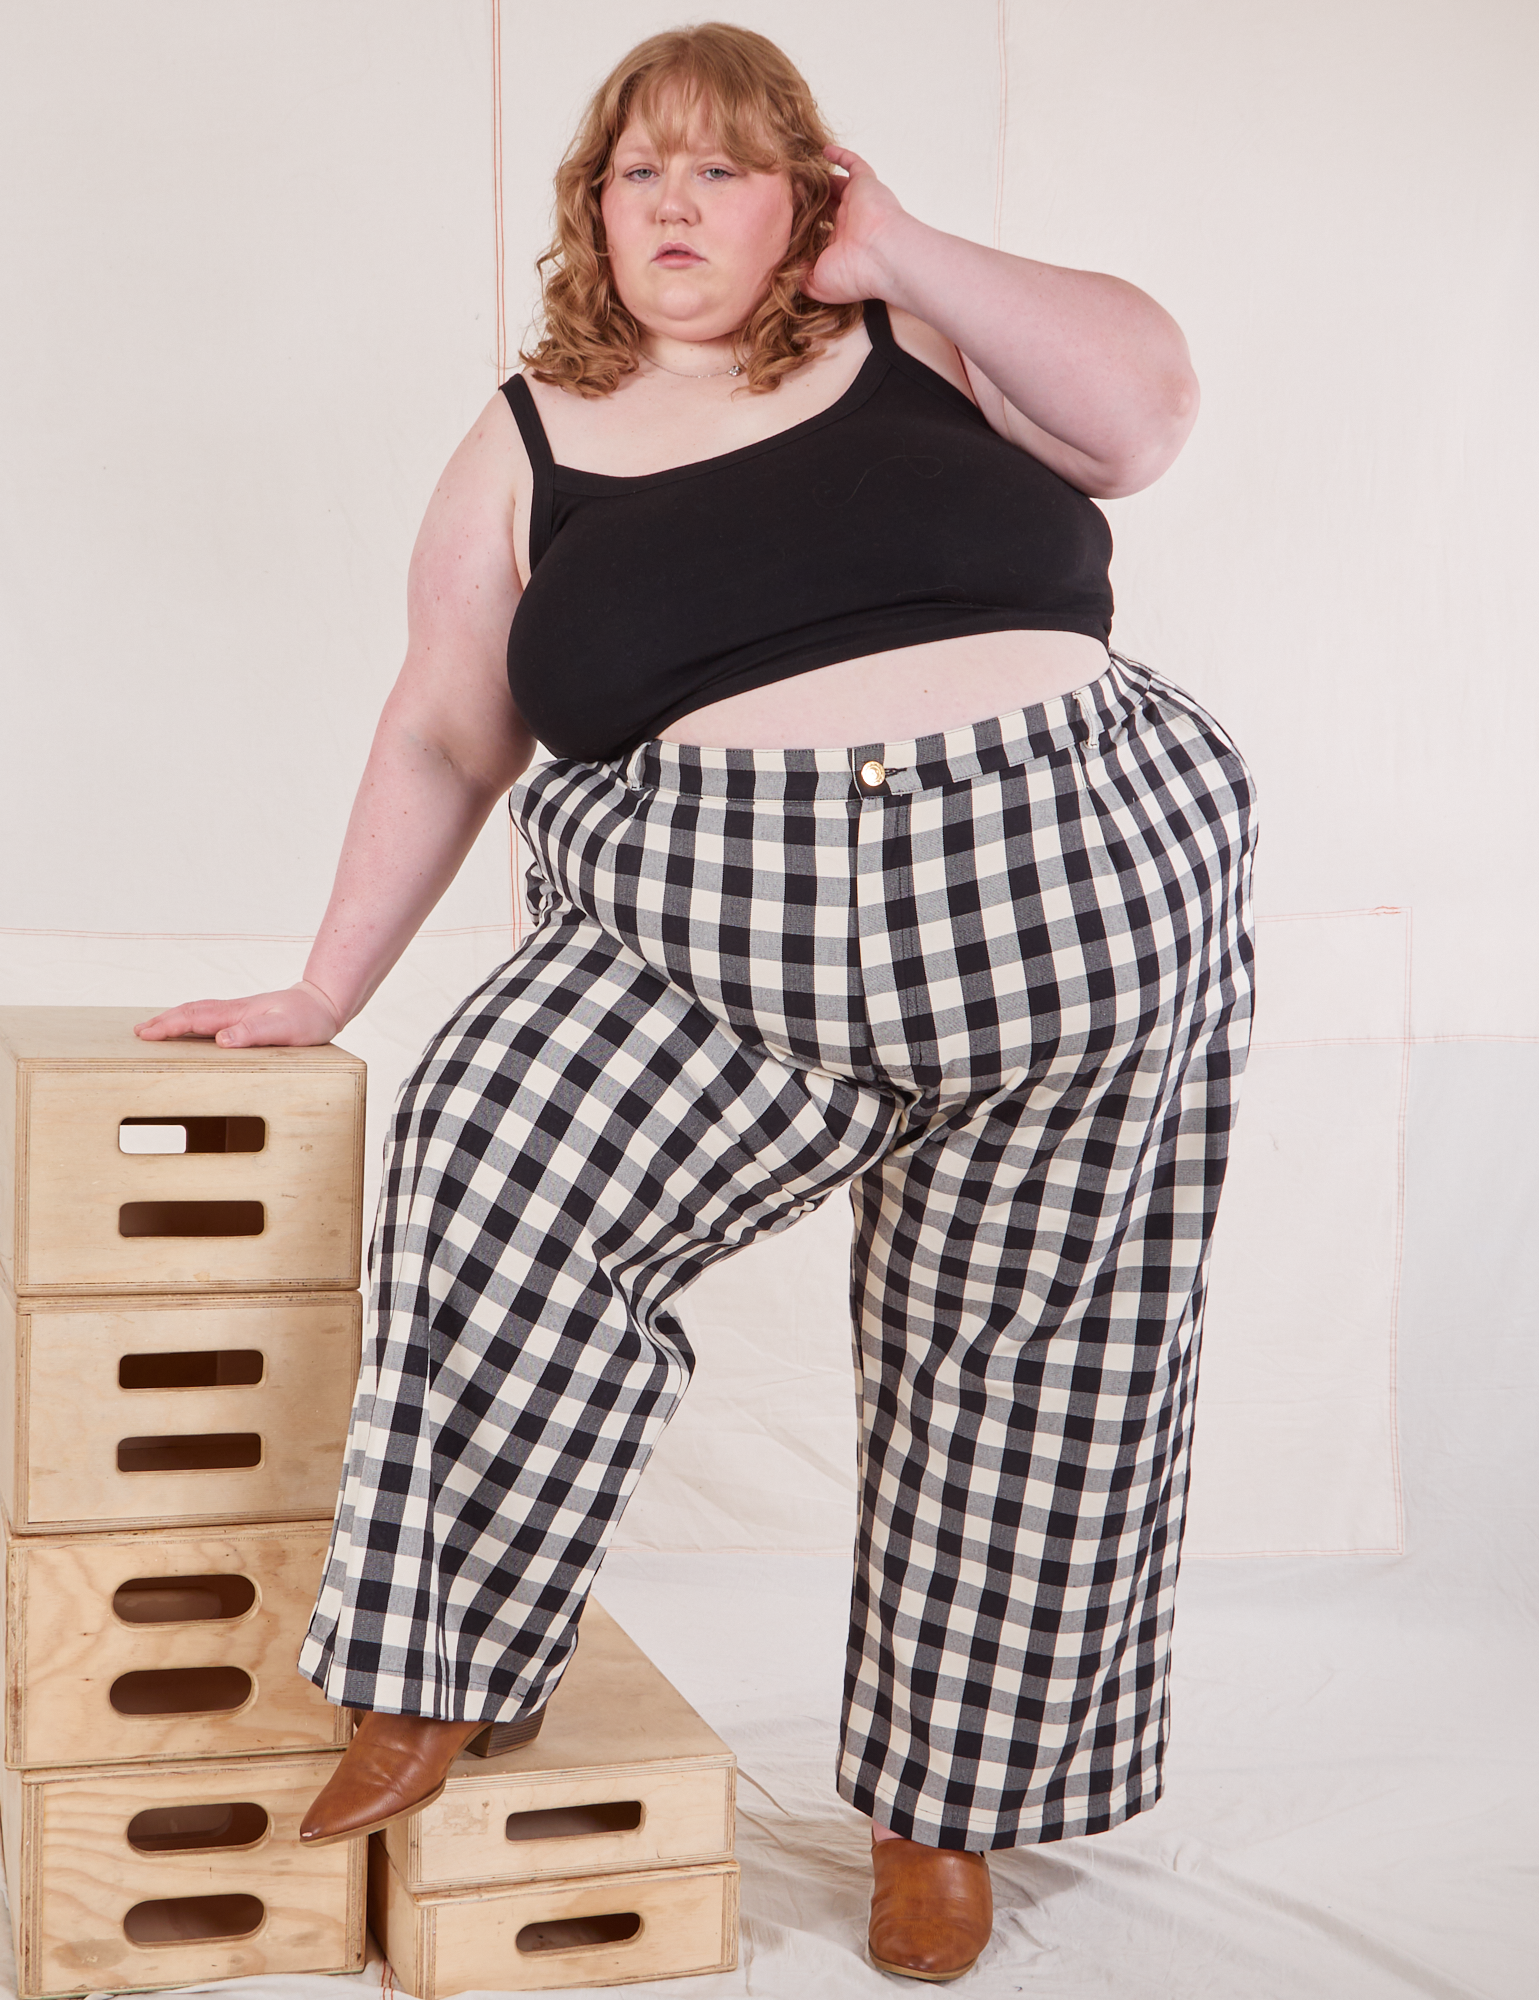 Catie is wearing Wide Leg Trousers in Big Gingham and black Cropped Cami